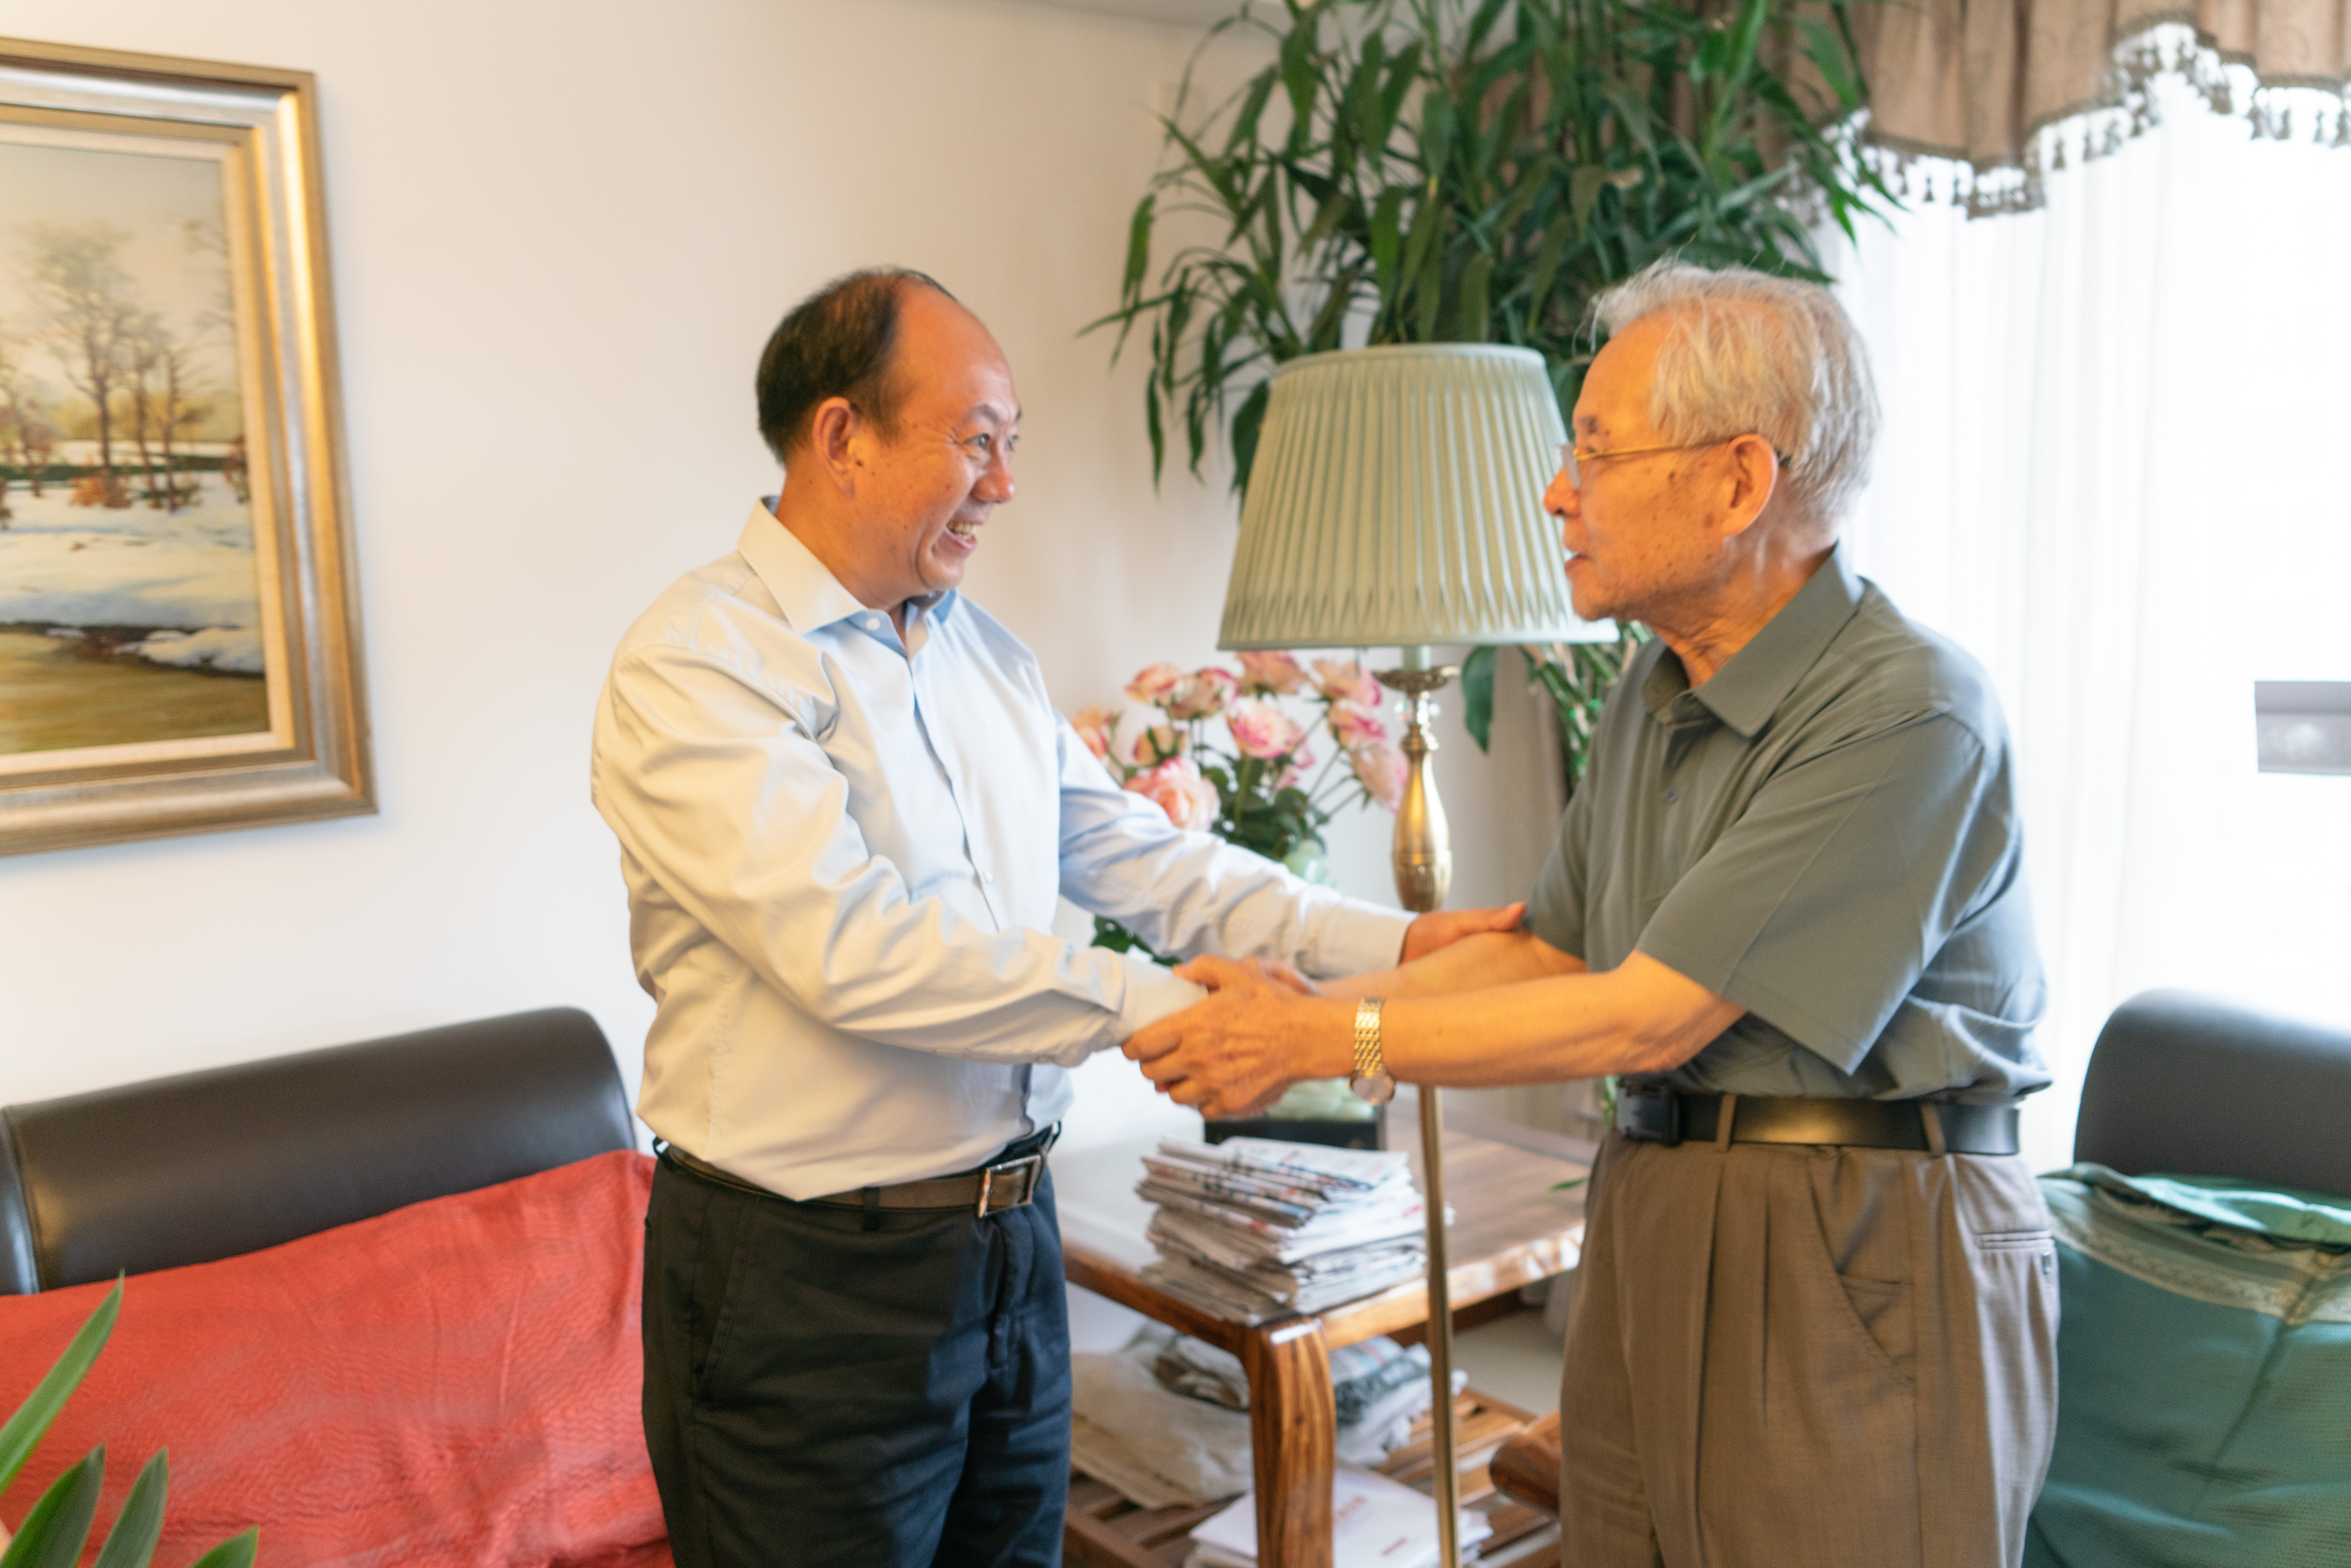 Dong Xiaolong, Secretary of the Education Working Committee of the provincial Party committee, visited academician Zhang Guowei at the University